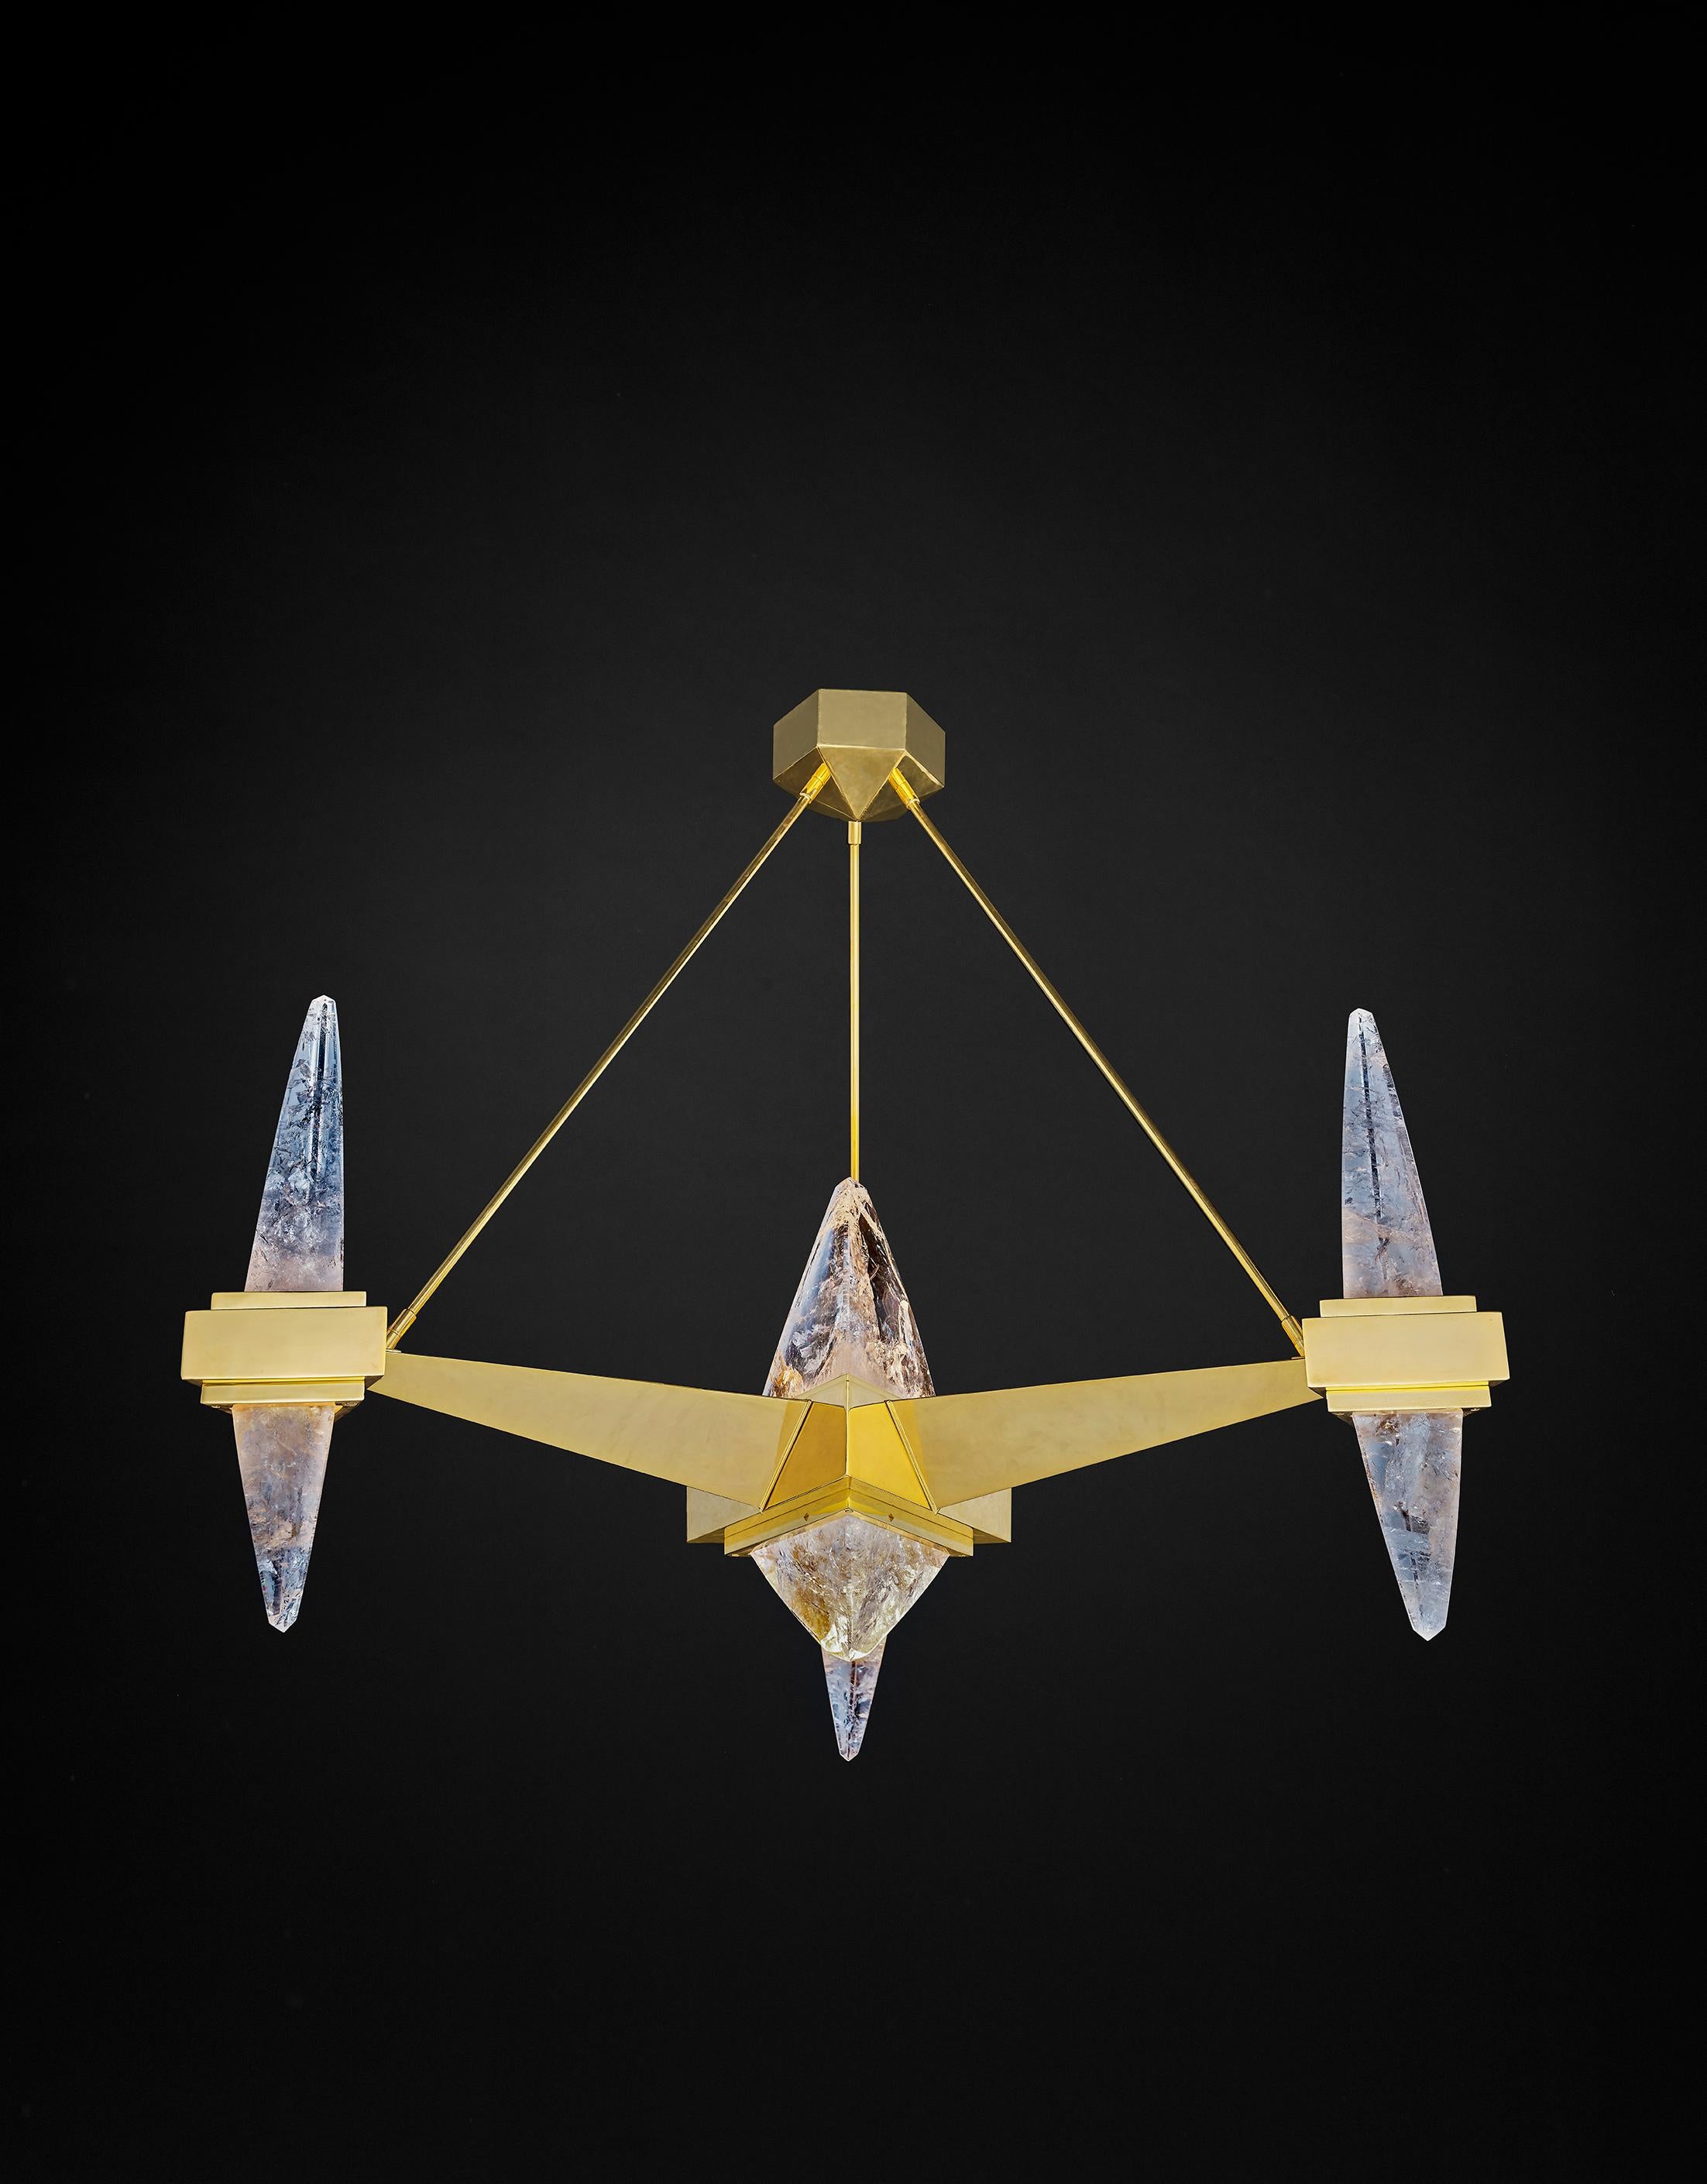 Ultimate rock crystal and 24 K gold plated Fuji chandelier model.
The chandelier is totally handmade in France, the gold plated is the same used by very prestigious French luxury brands.
Could be made by request in different dimensions and